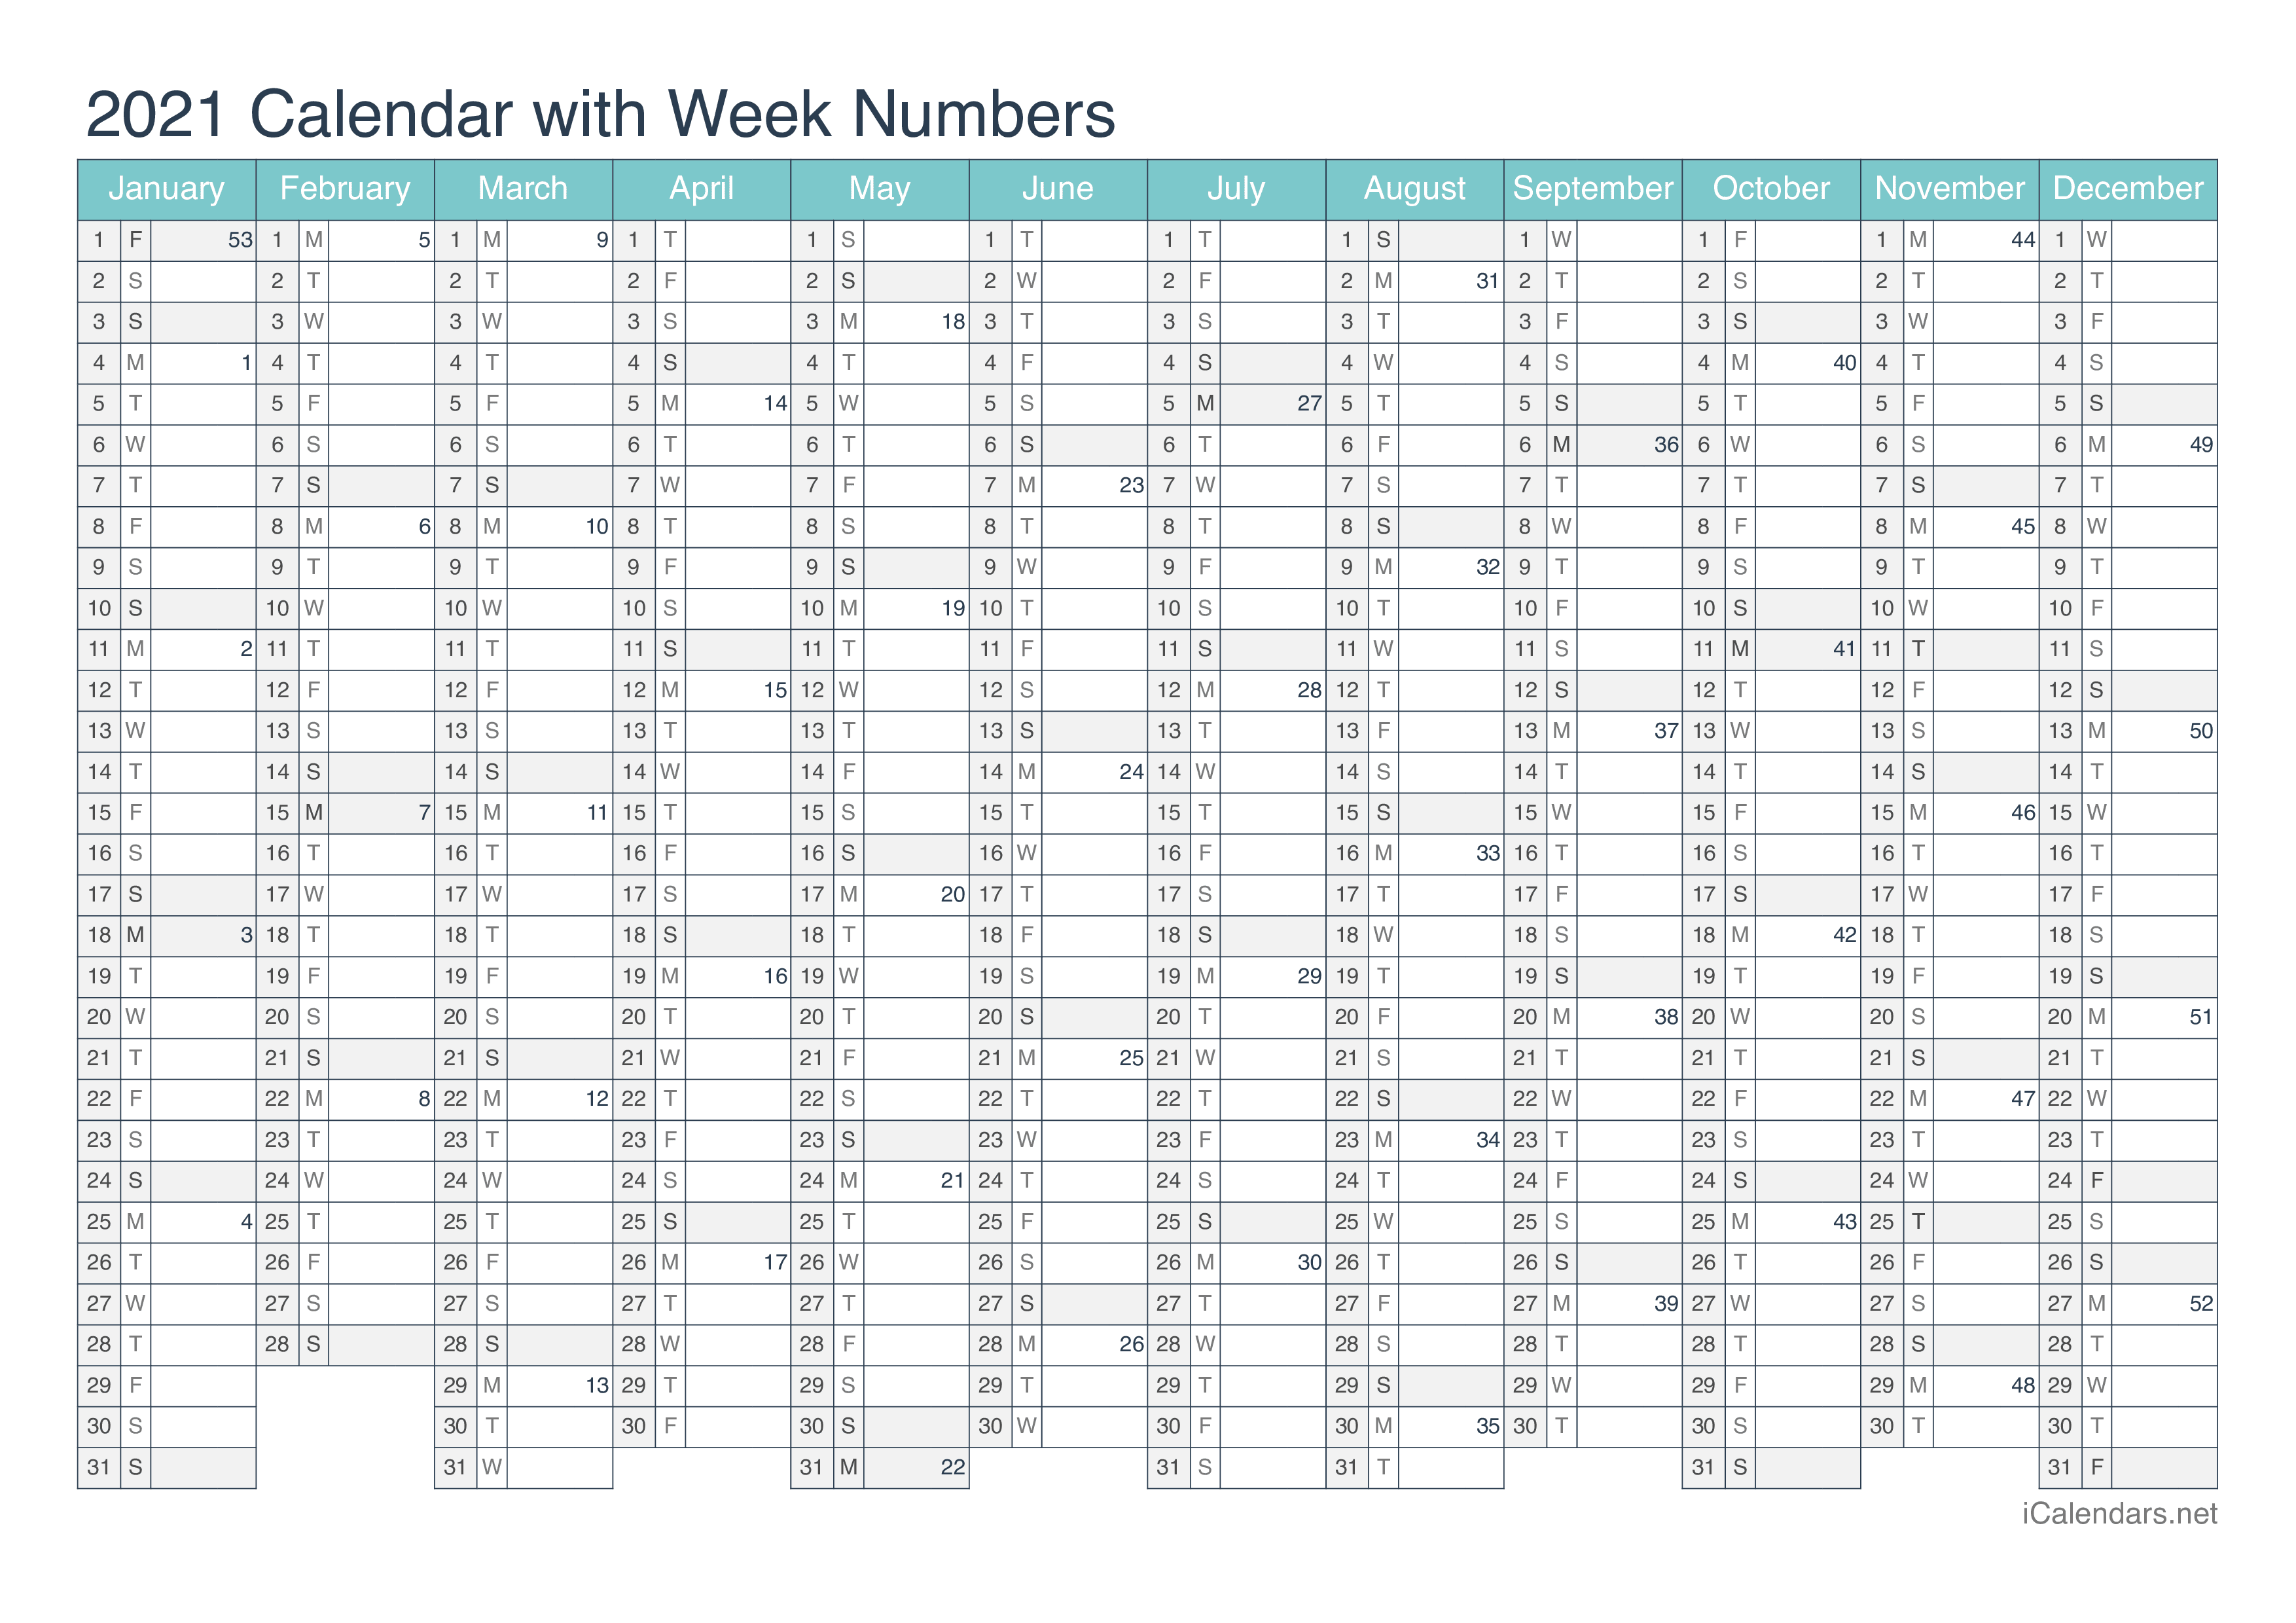 2021 Calendar with week numbers - Turquoise